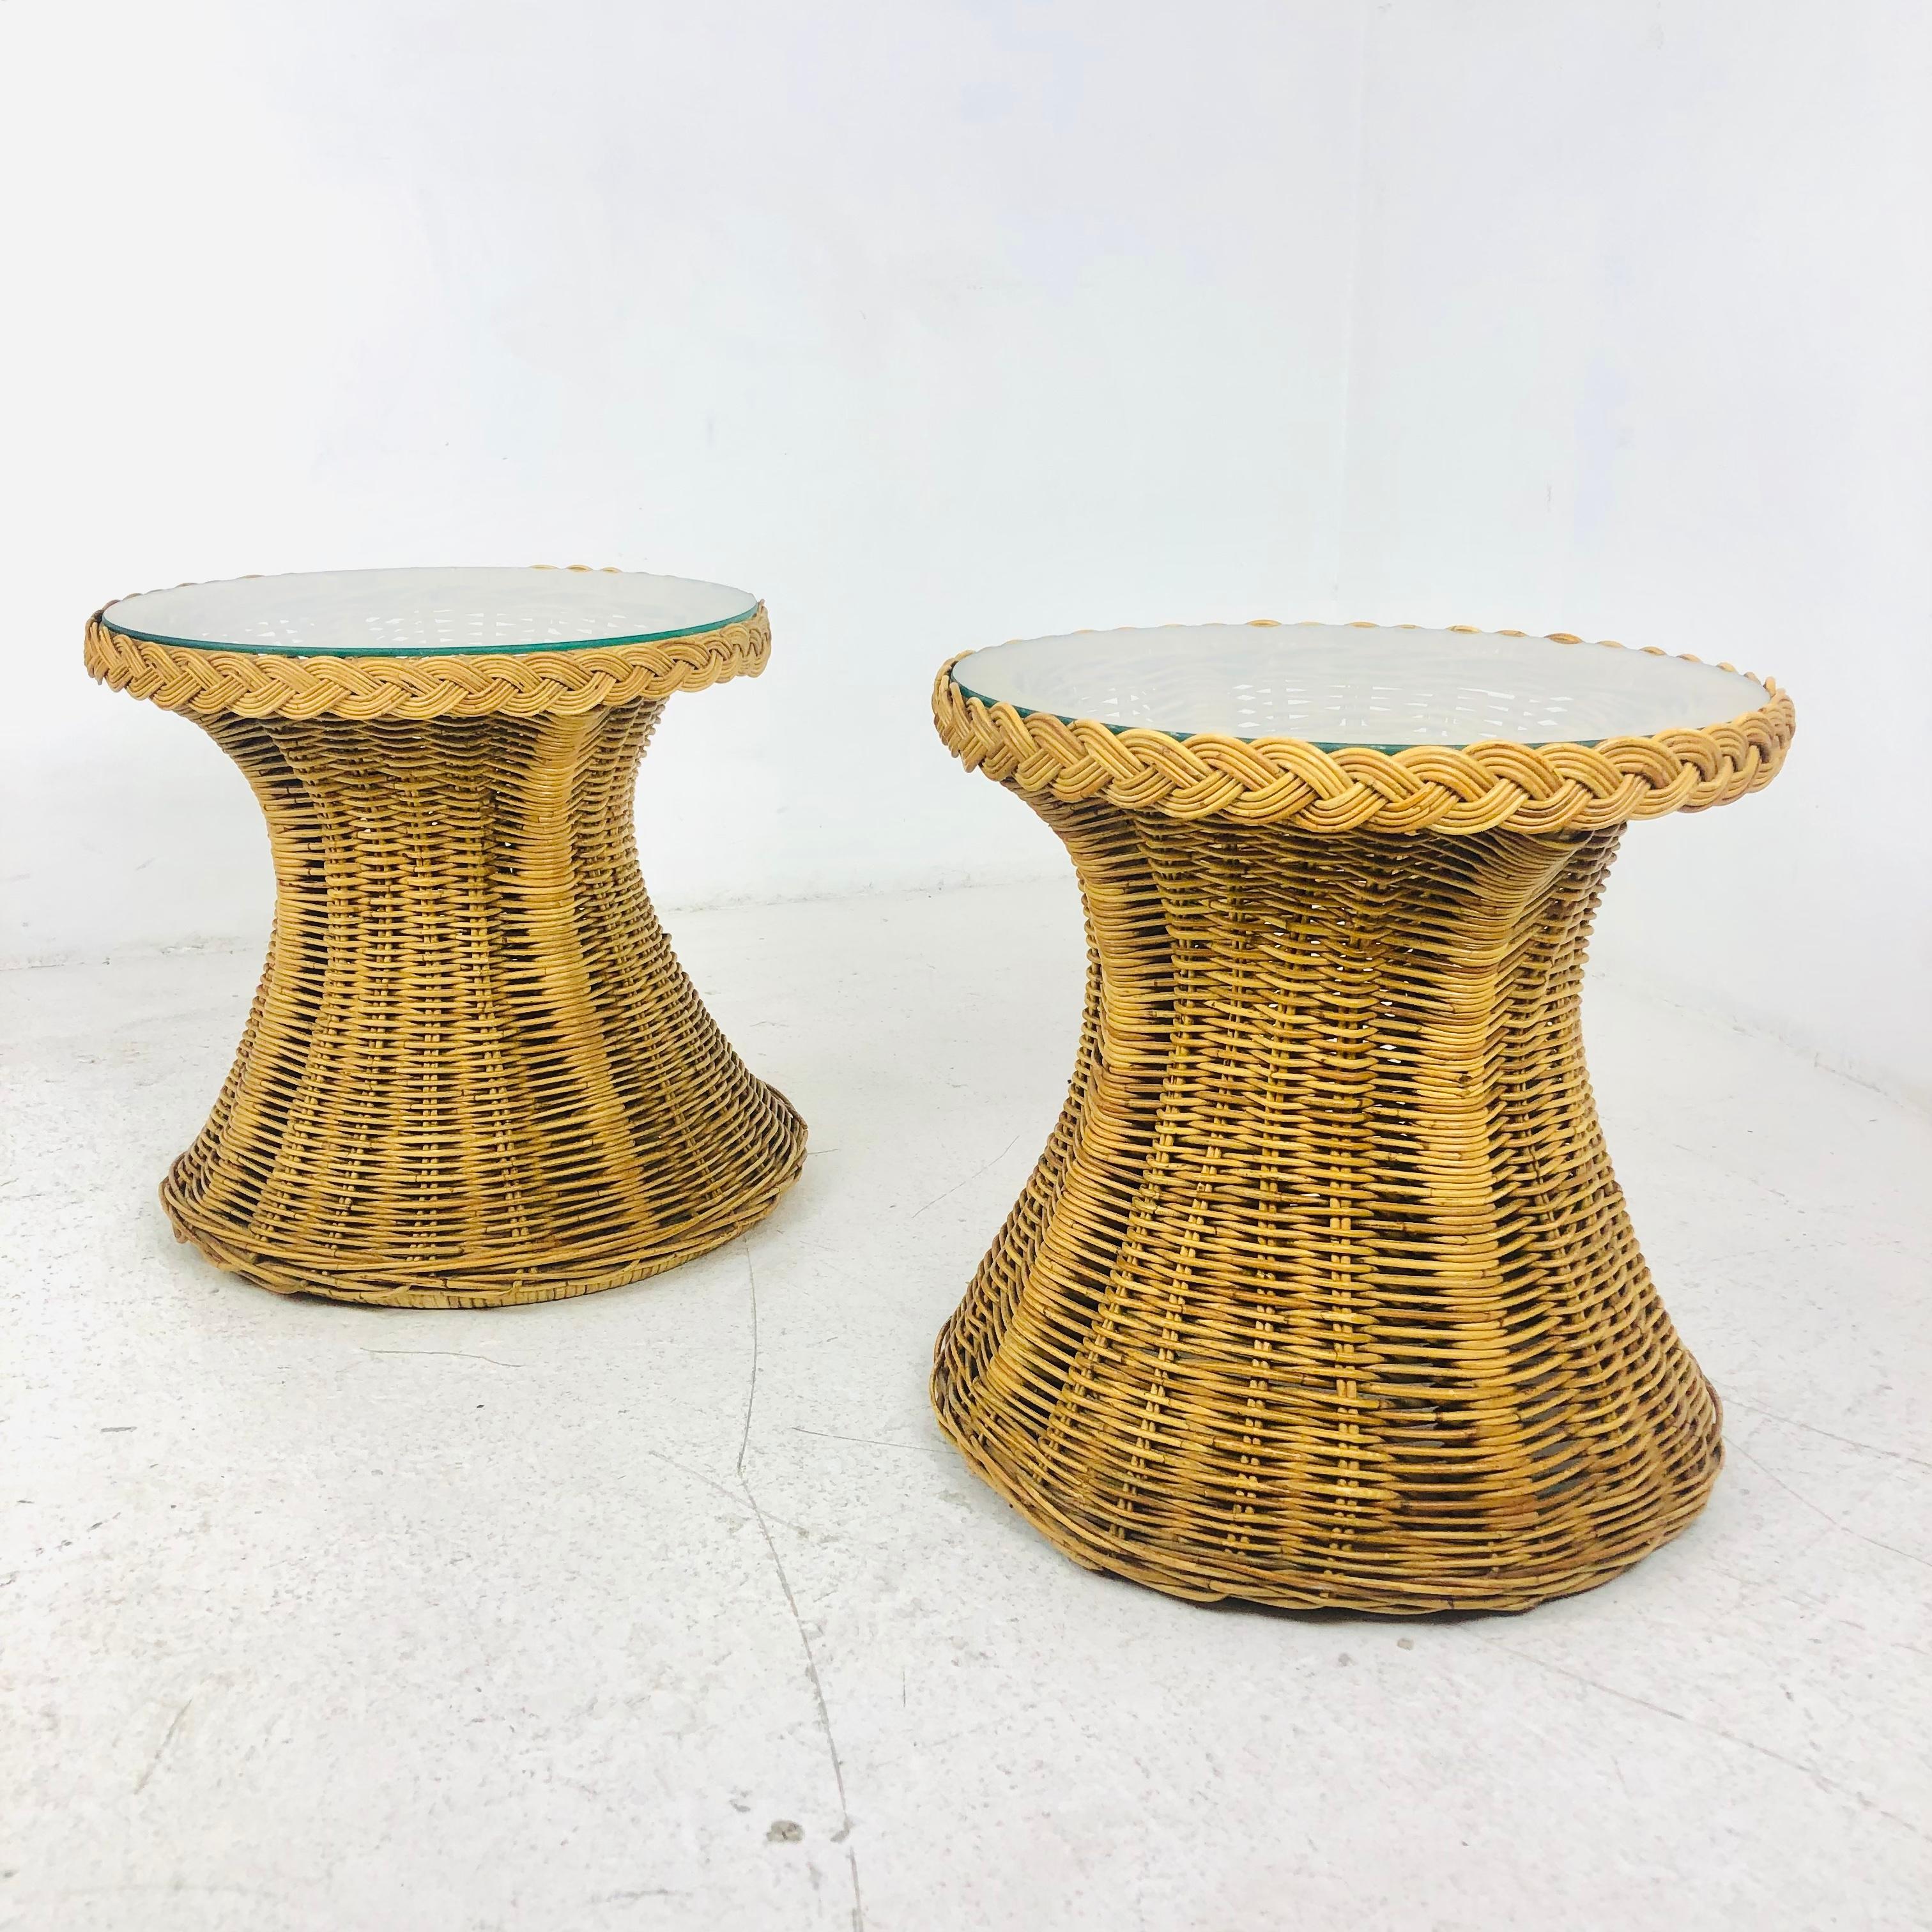 Pair of round vintage rattan side tables with glass tops. Set is in excellent condition. Base is 19